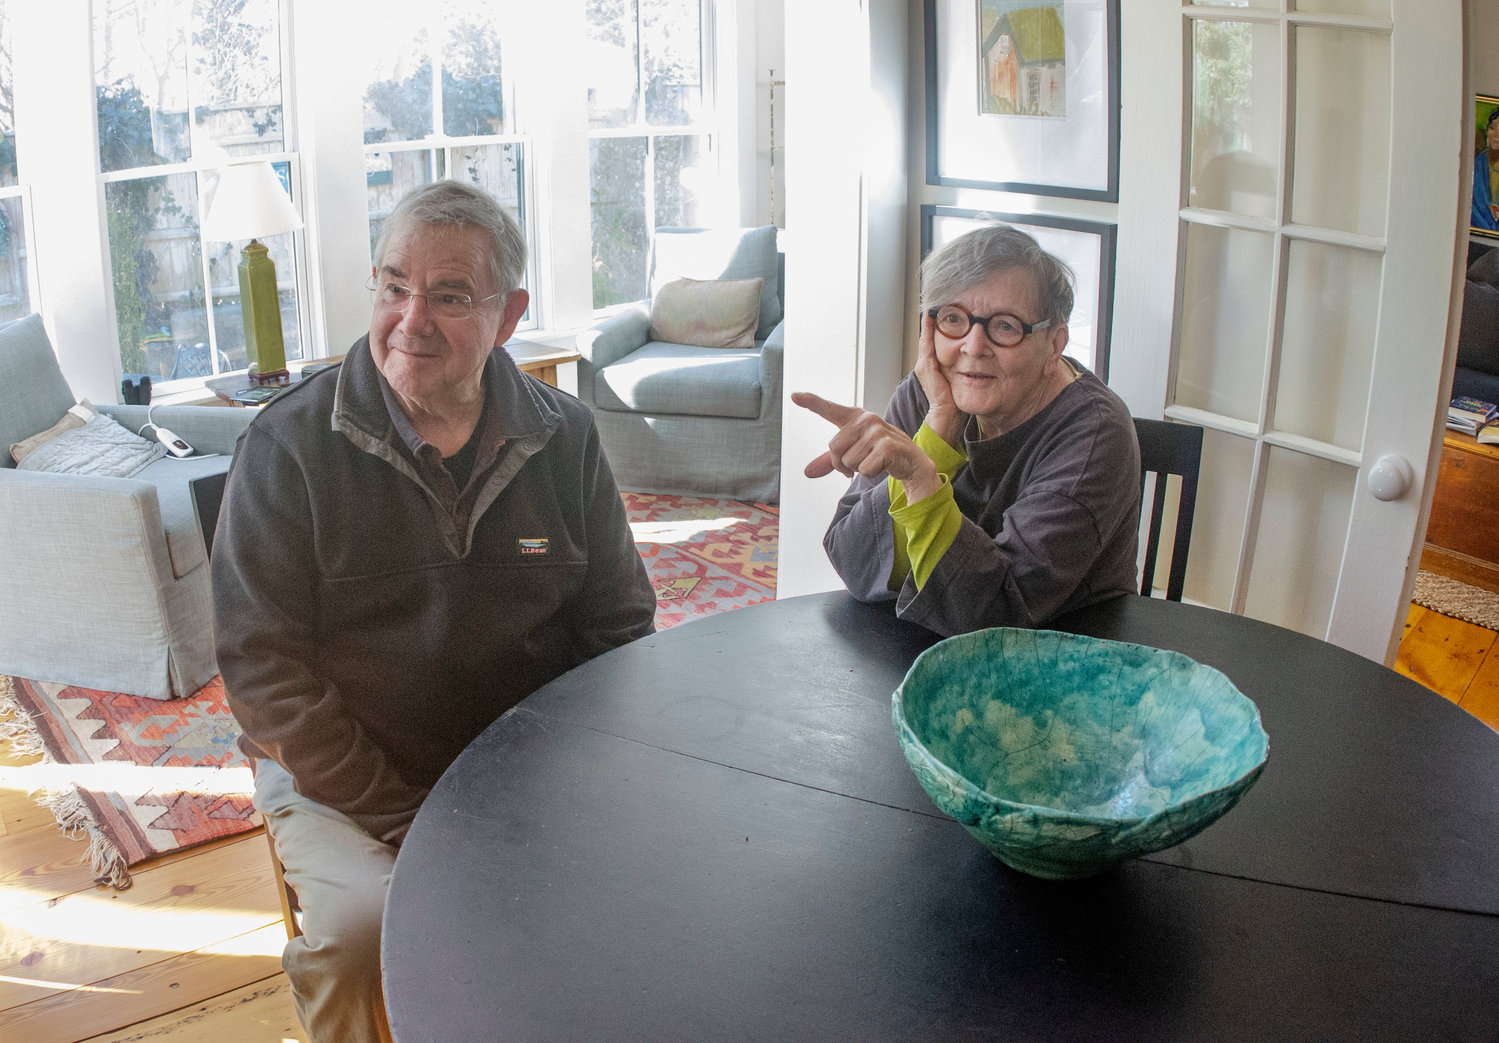 Mitch and Jane Henderson relax inside their 262-year-old home. Jane, the artist, has helped decorate with original artwork, including her own pottery, and Mitch, the engineer, helped sketch out a solar energy plan that may pay for itself in a decade.